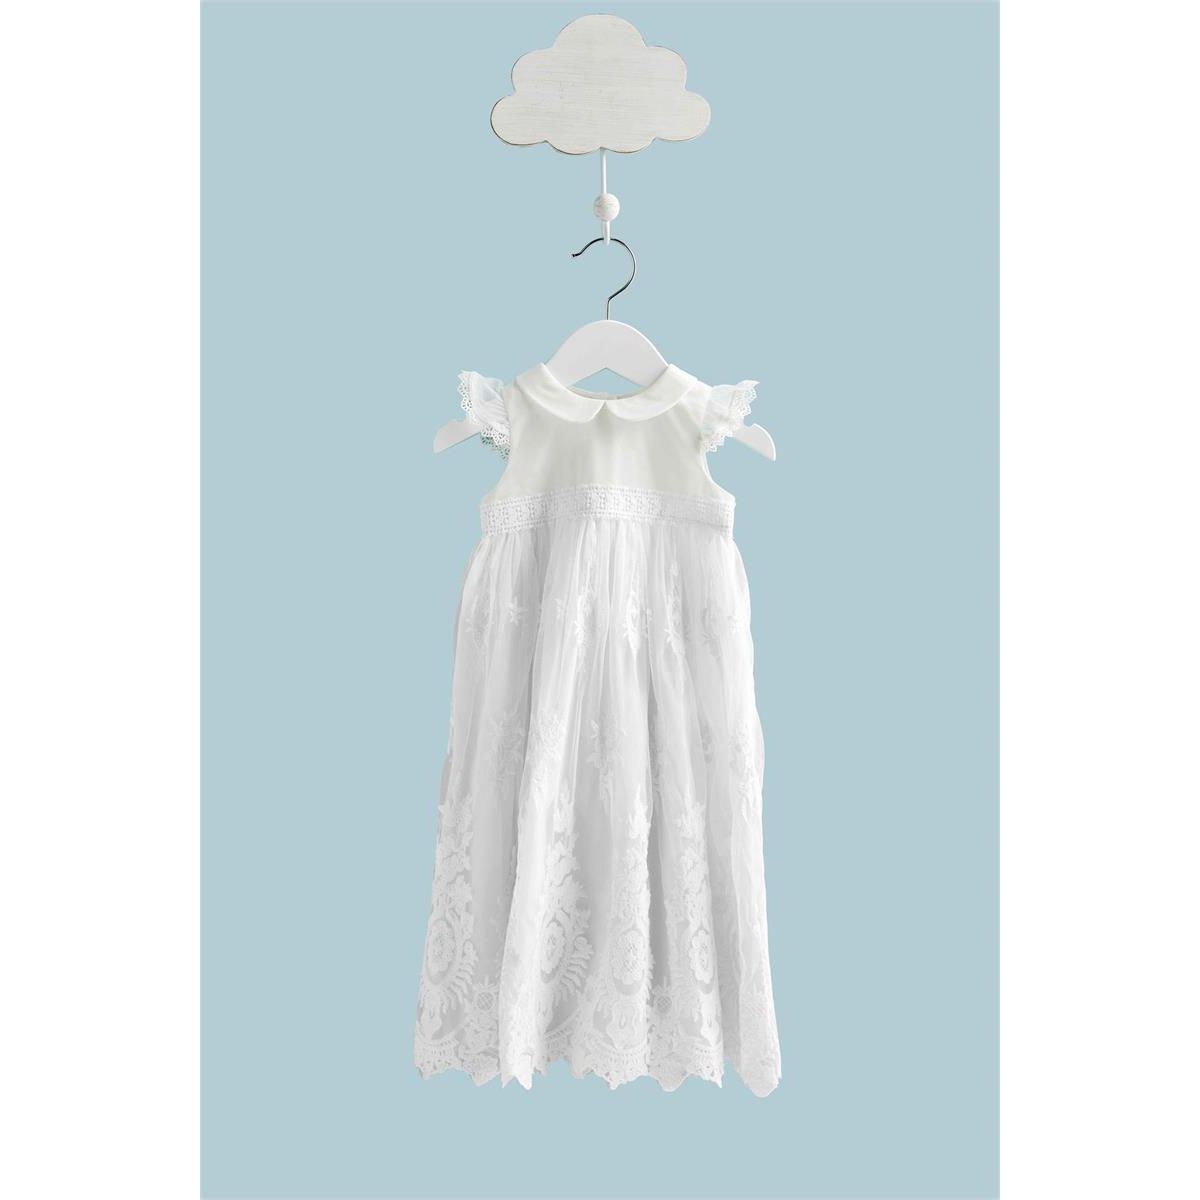 Christening Gown